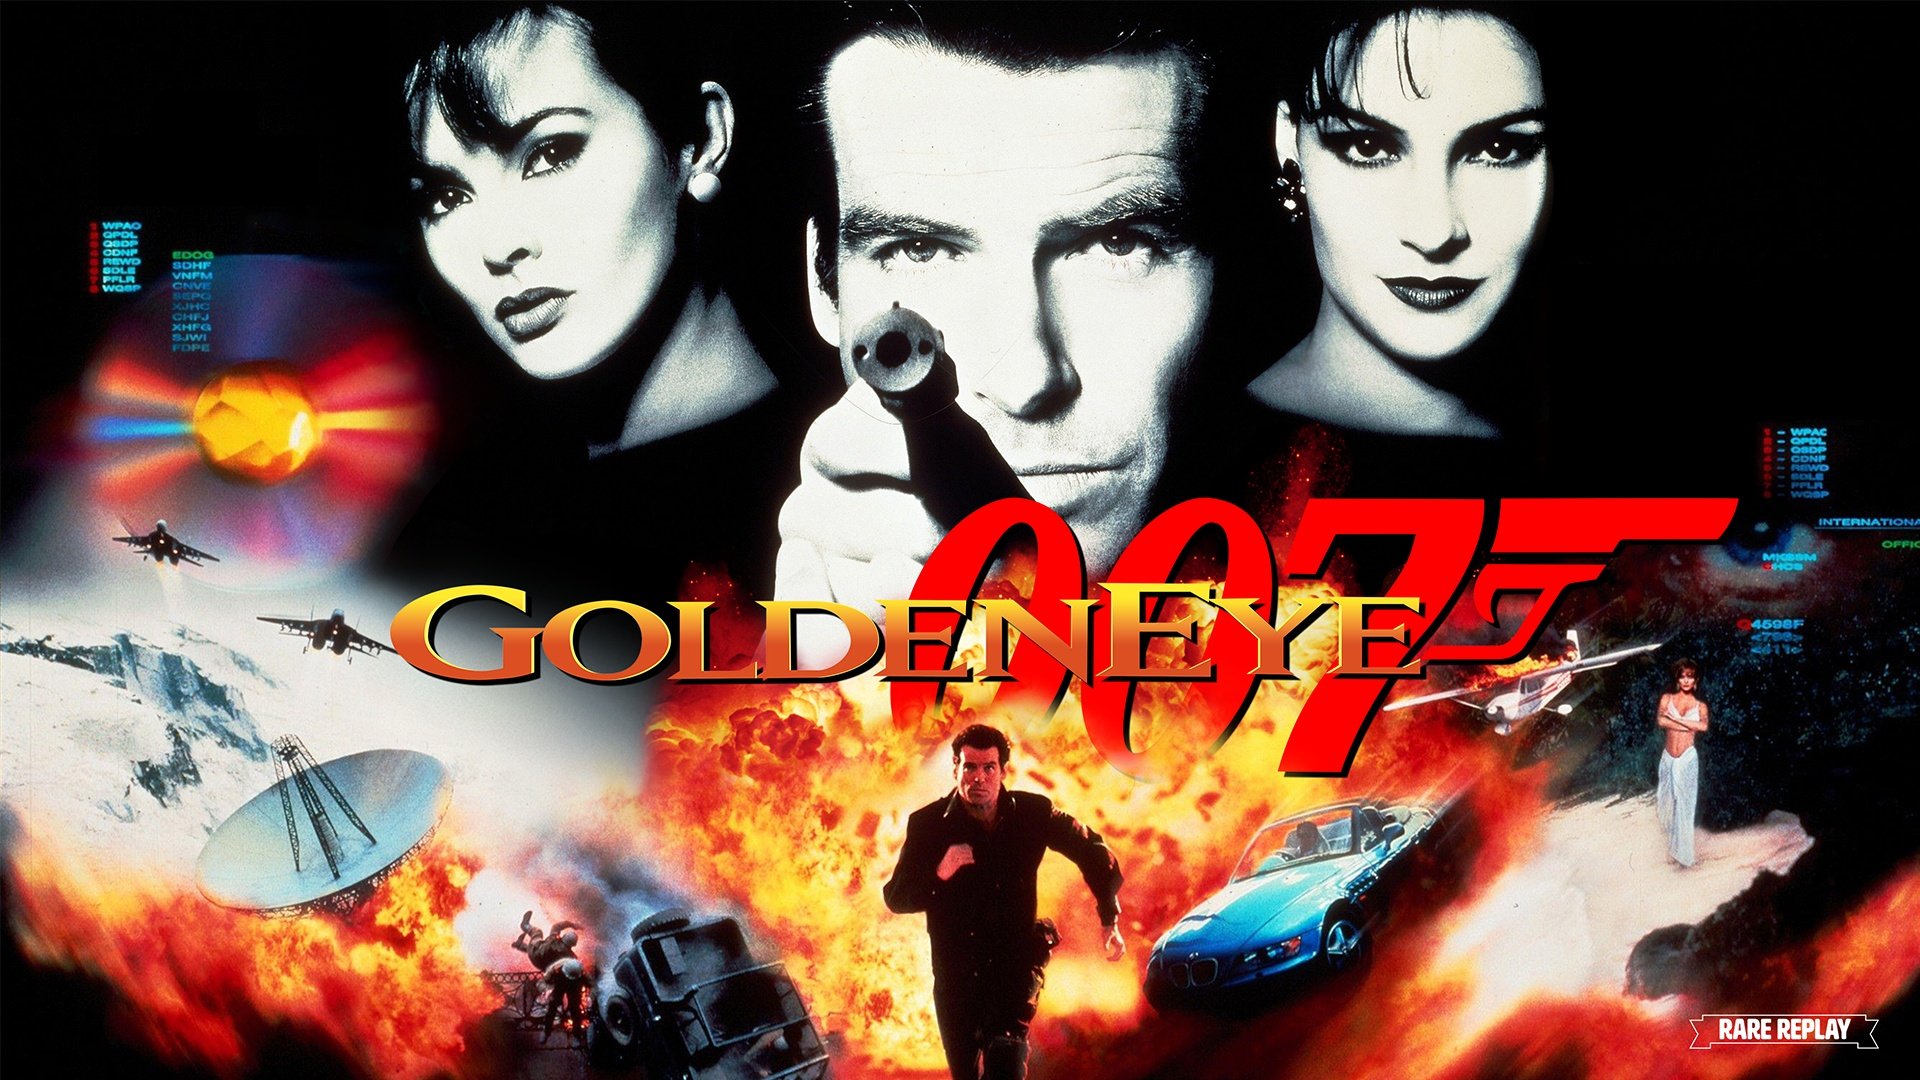 GoldenEye Gets Reloaded With Move Bundle, PS3 Loaded With